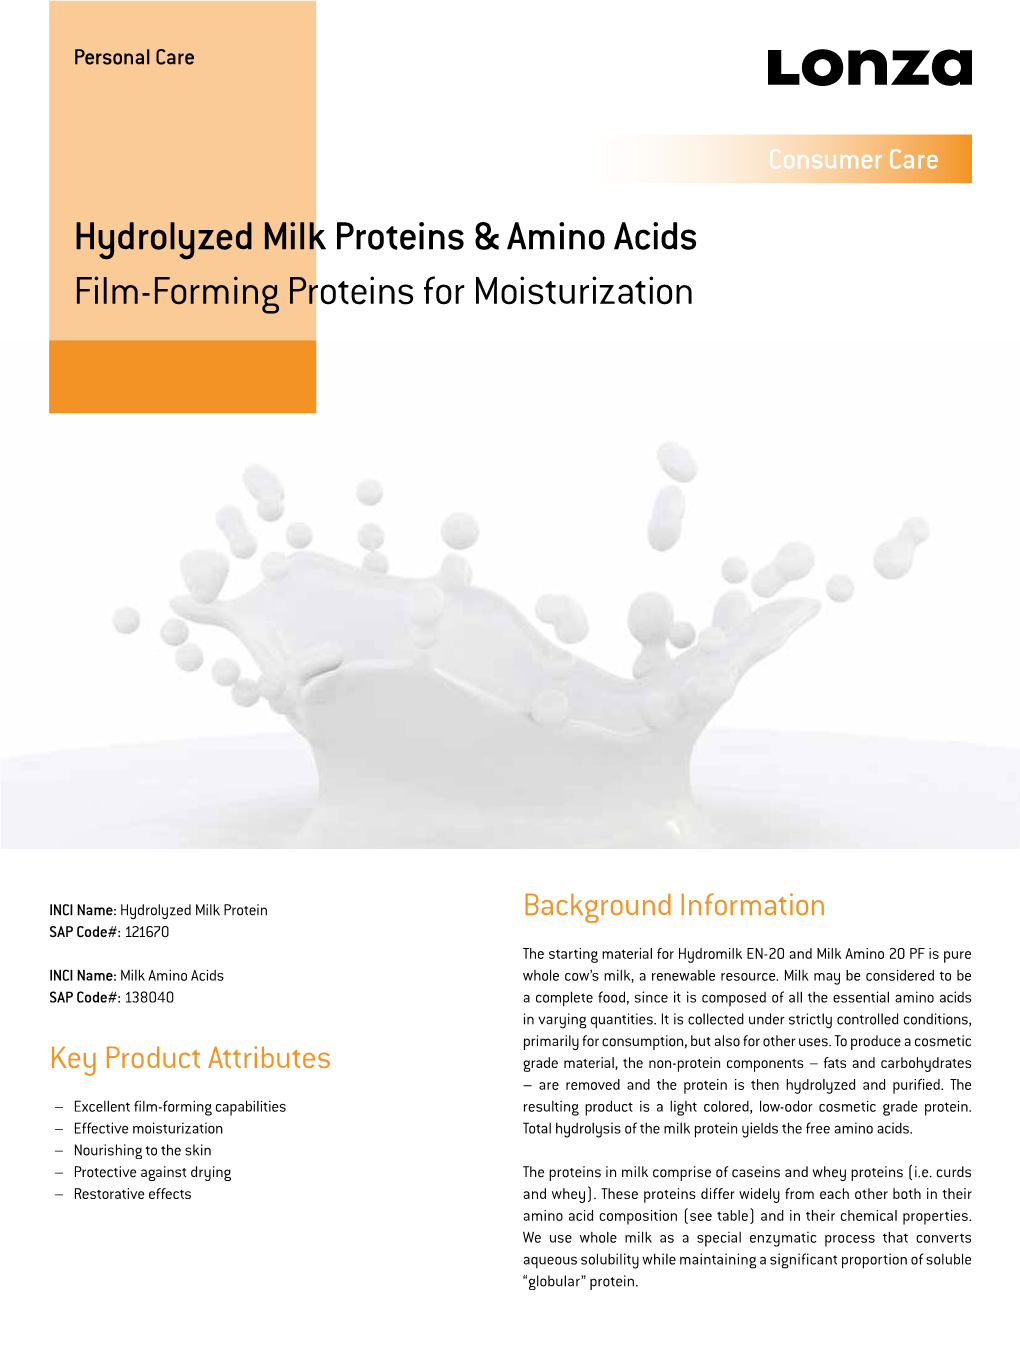 Hydrolyzed Milk Proteins & Amino Acids Film-Forming Proteins For